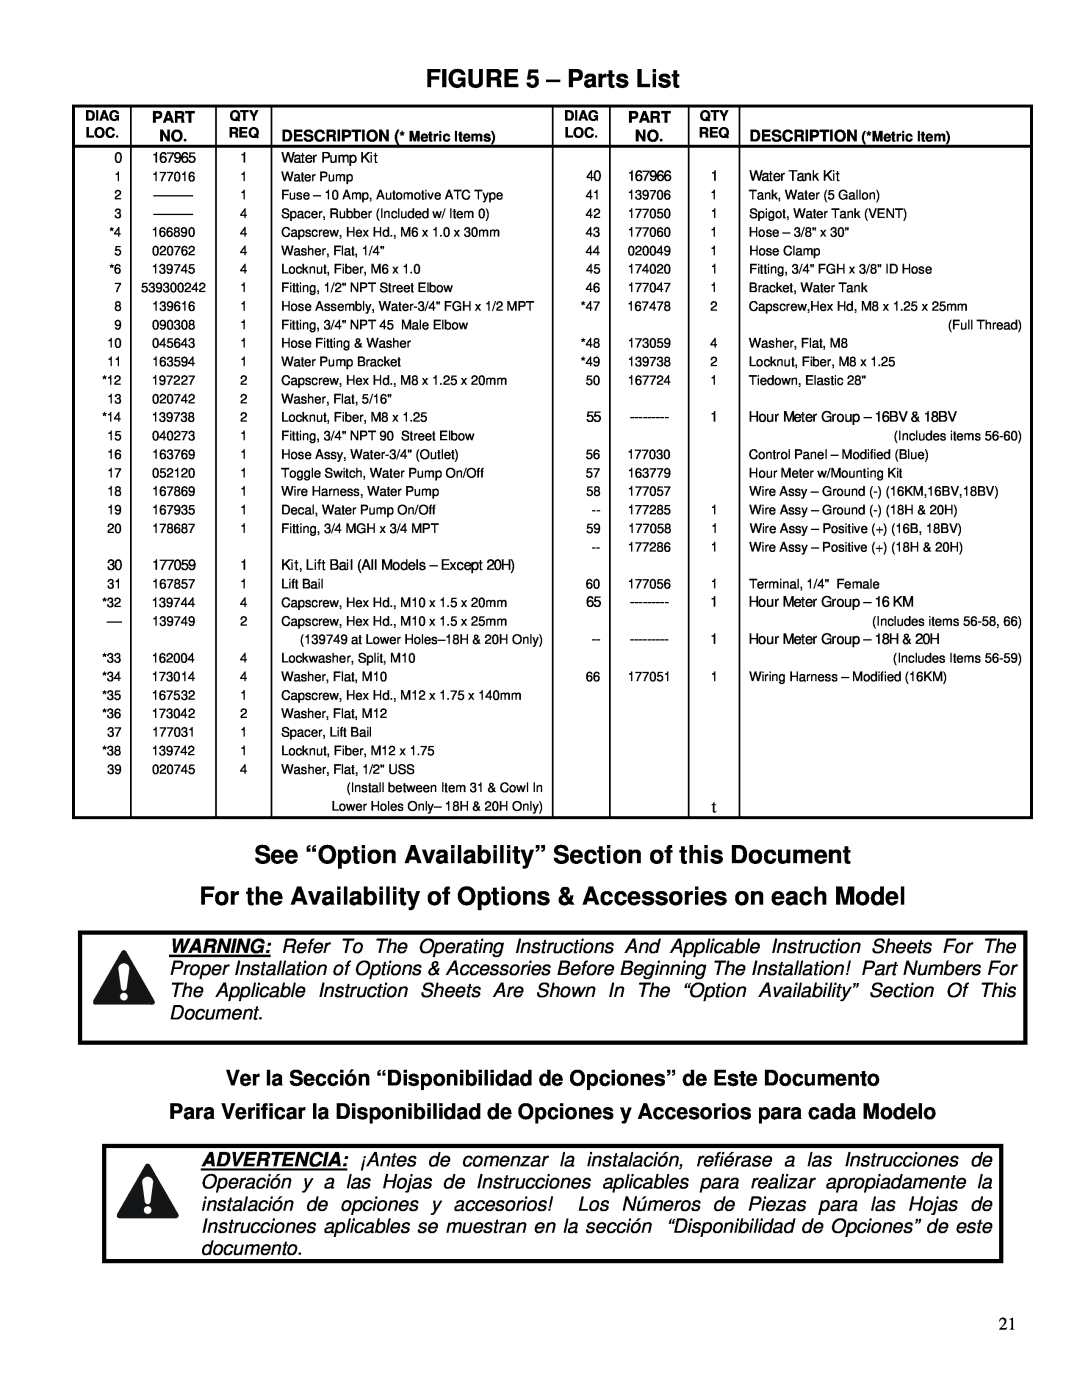 Husqvarna PAC IV-16KM, PAC IV-8KM, PAC IV-20H, PAC IV-9W Parts List, See “Option Availability” Section of this Document 